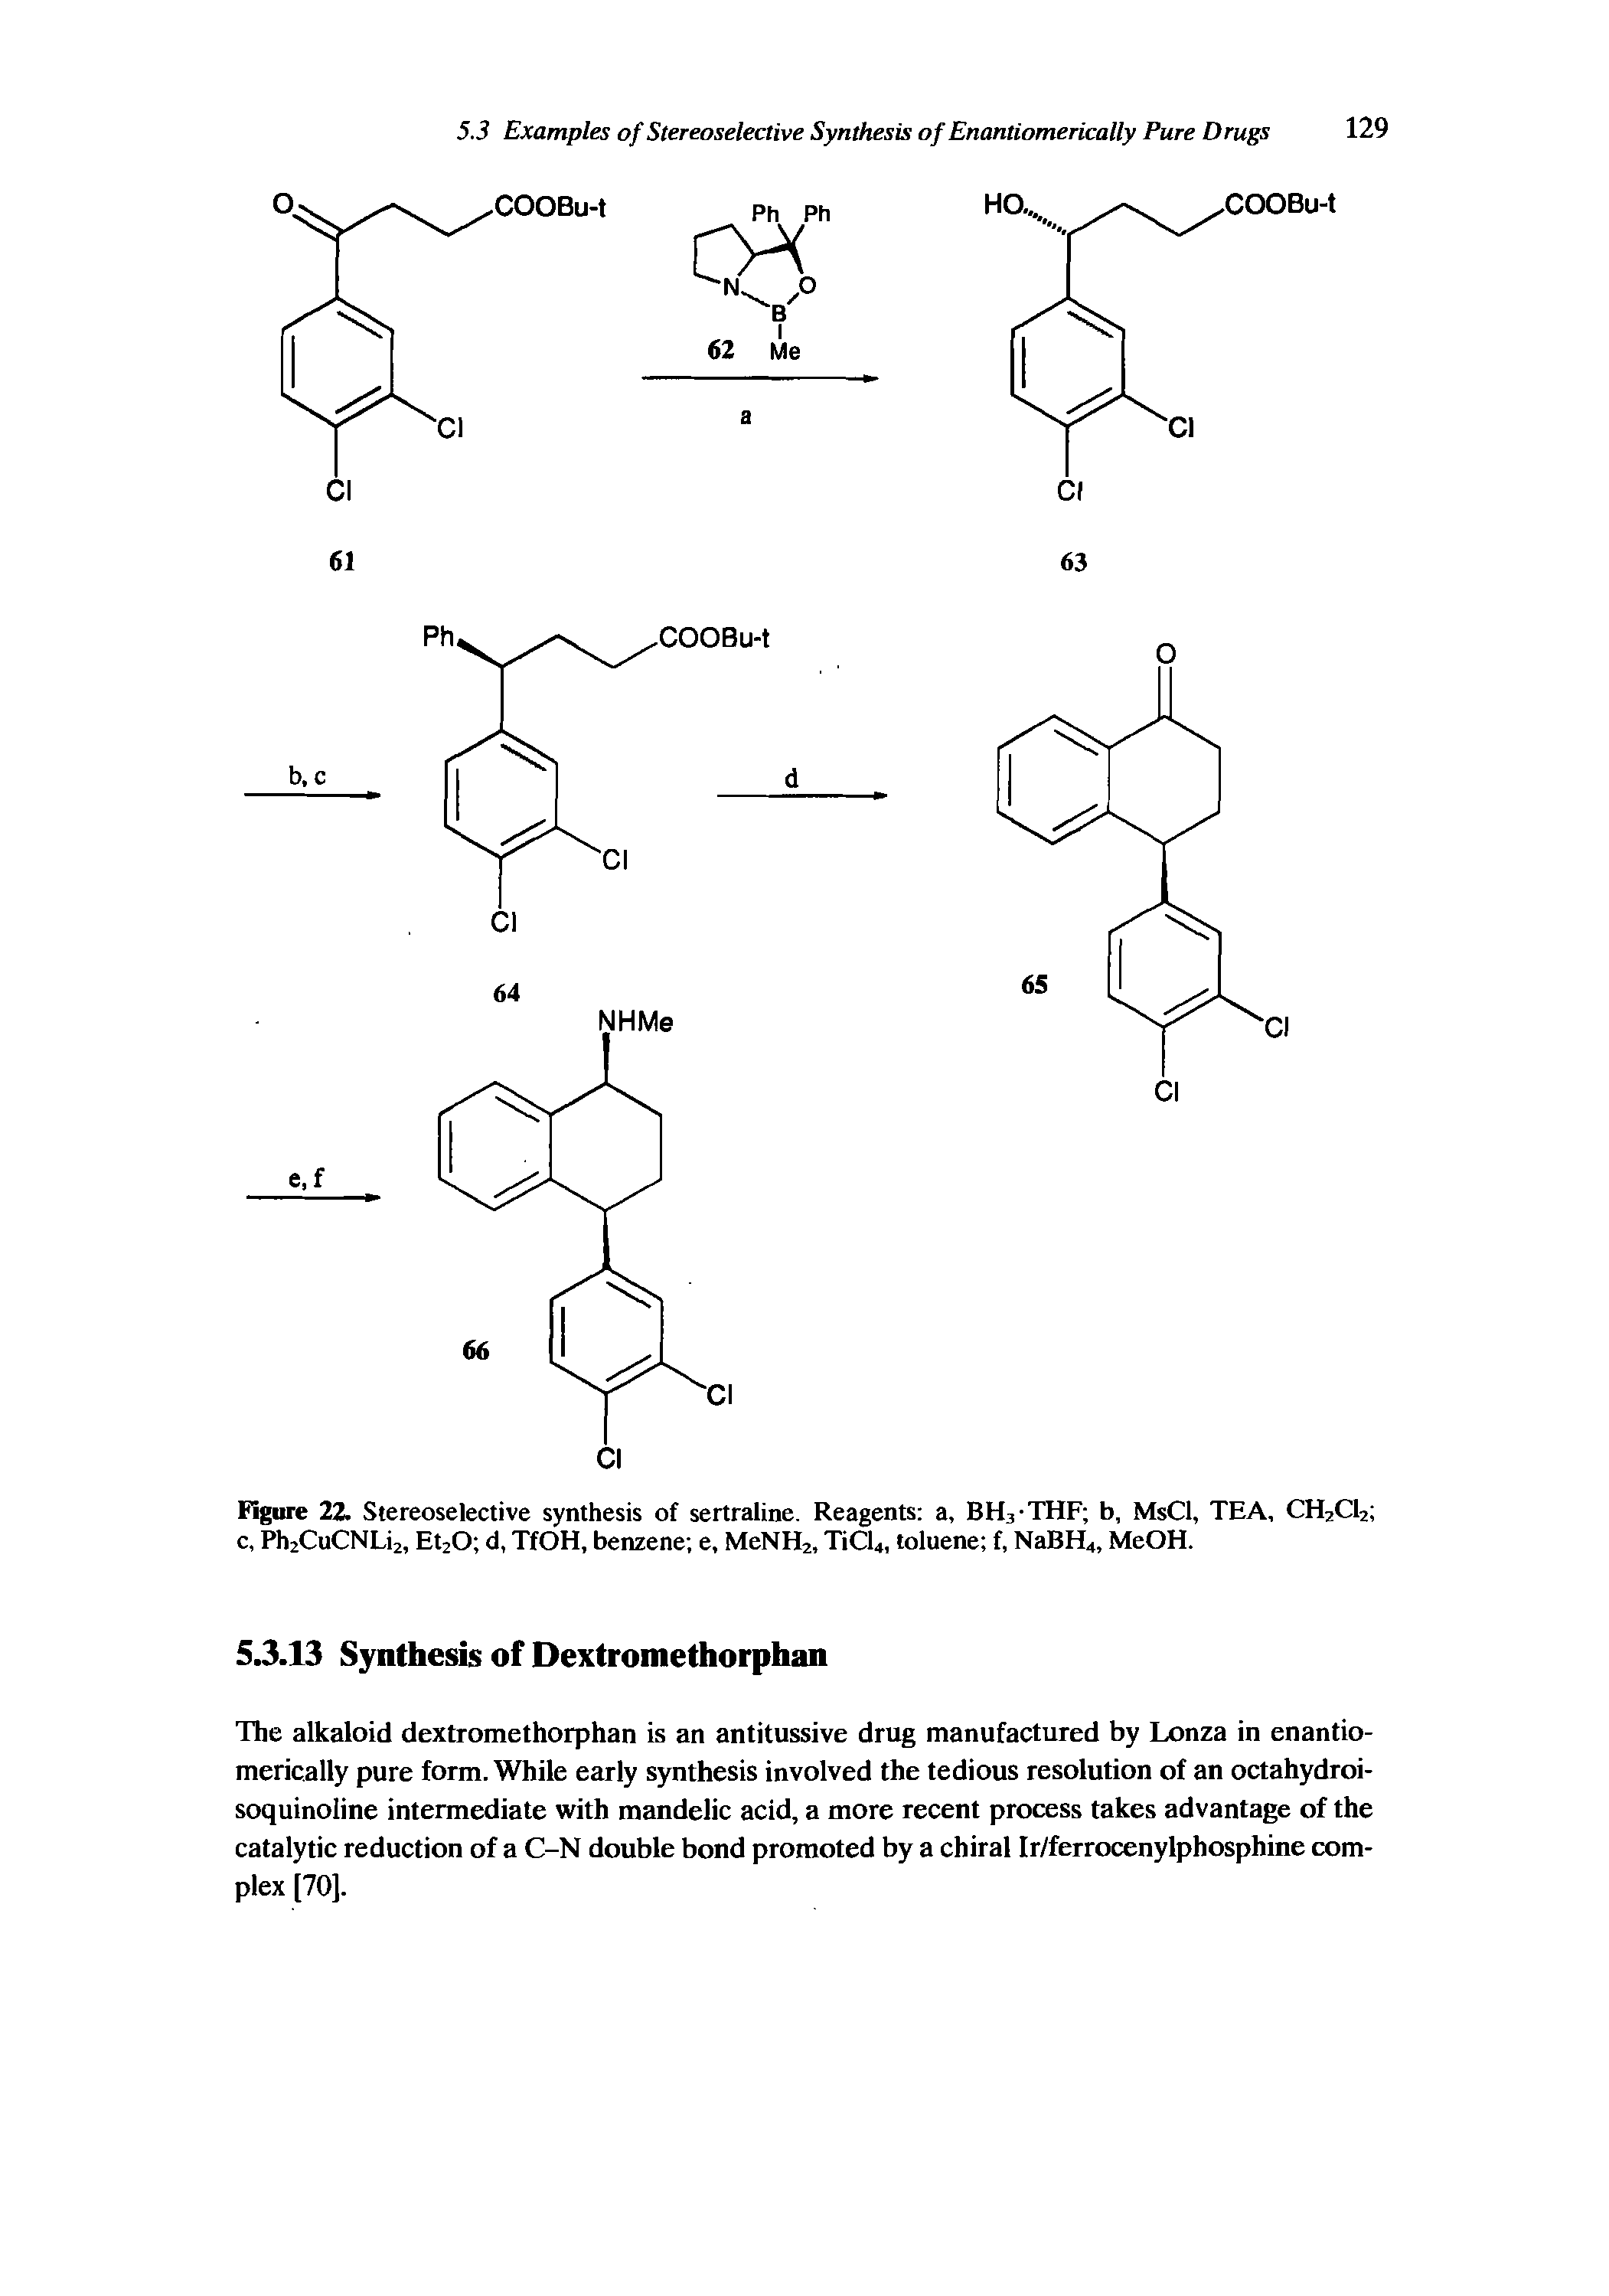 Figure 22. Stereoselective synthesis of sertraline. Reagents a, BH3-THF b, MsCl, TEA, CH2C12 c, Ph2CuCNLi2, Et20 d, TfOH, benzene e, MeNH2, TiCl4, toluene f, NaBH4, MeOH.